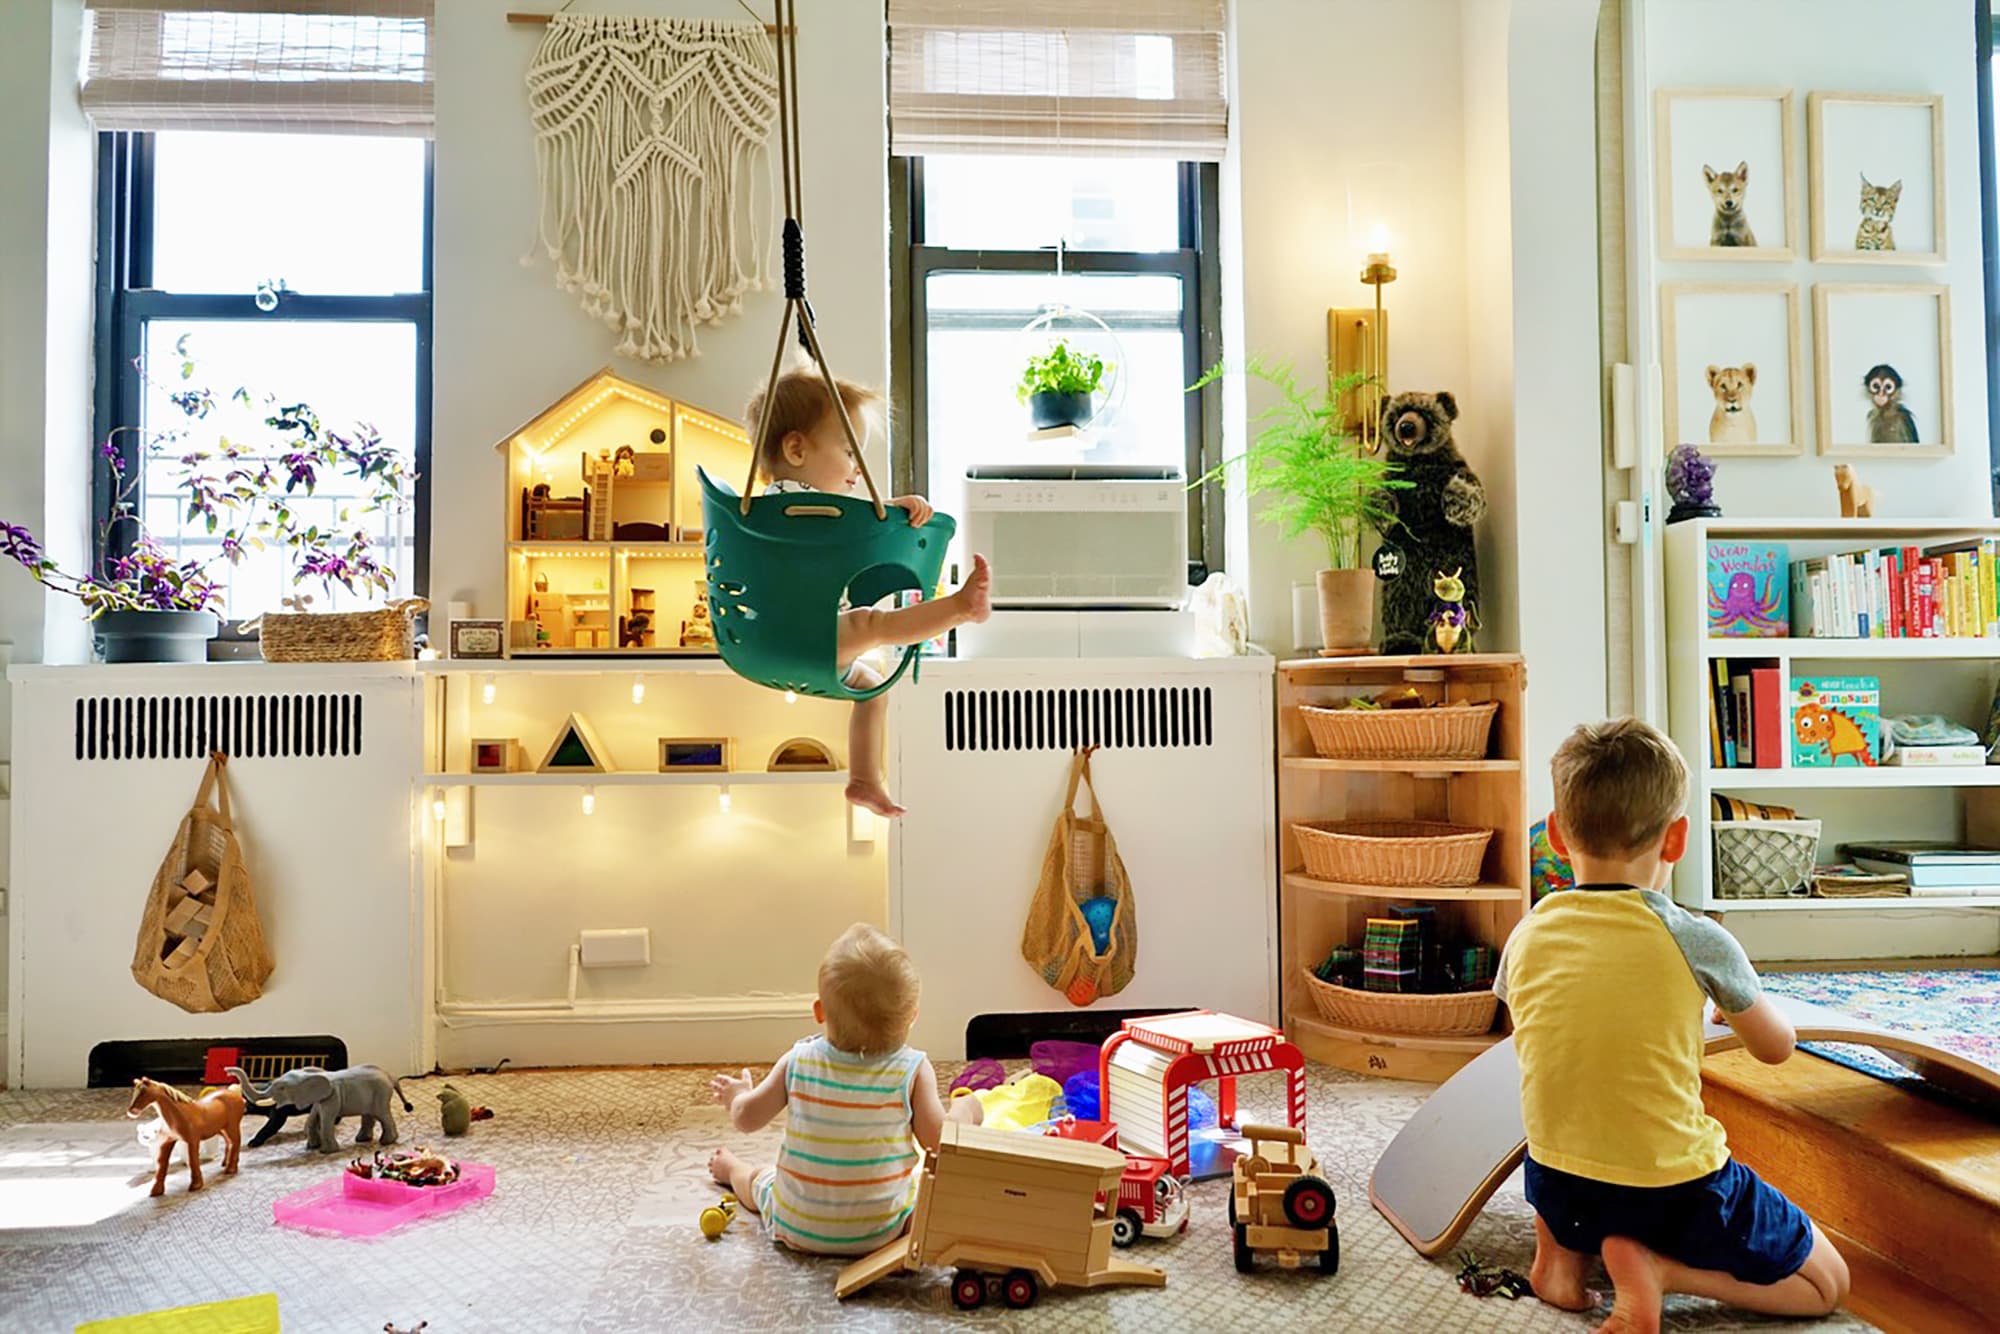 Space-Saving Baby Items for Small Houses, Apartments